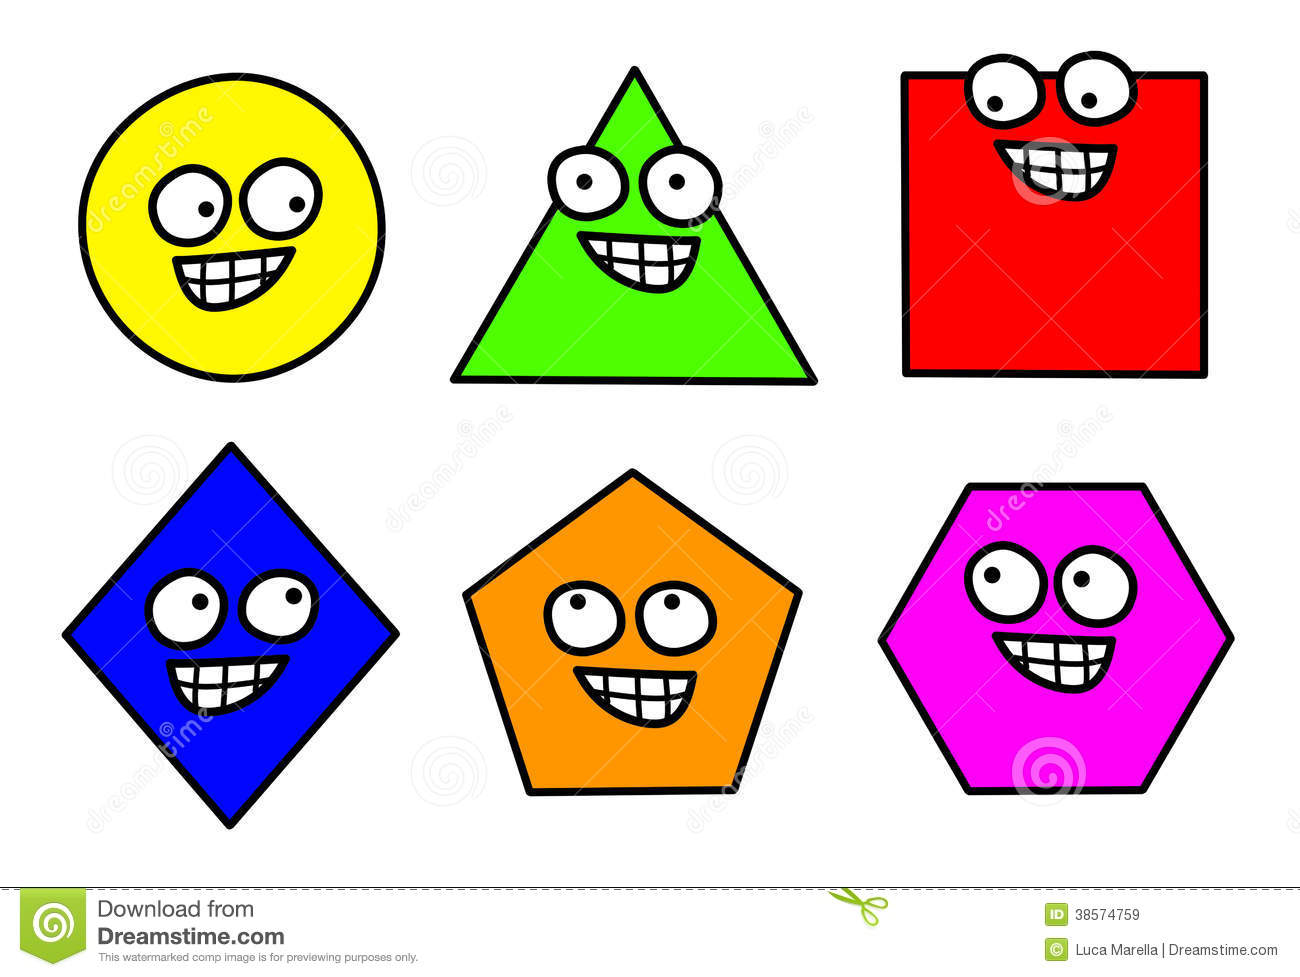 Shapes Clip Art Free Download | Clipart Panda - Free Clipart Images